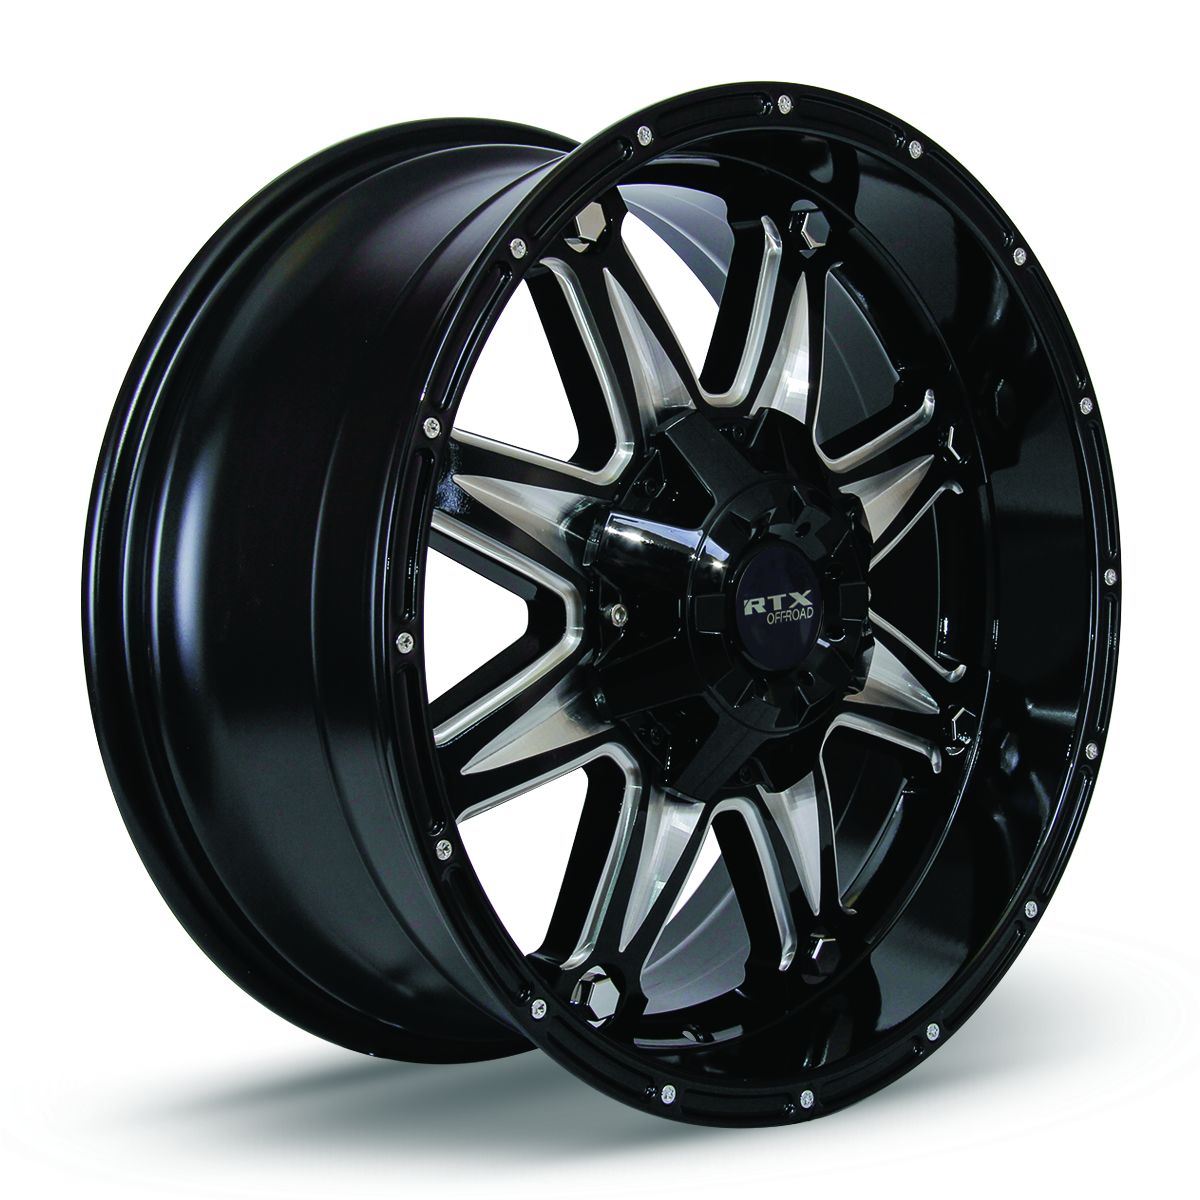 Spine • Black with Milled Spokes • 20x9 8x170 ET15 CB125